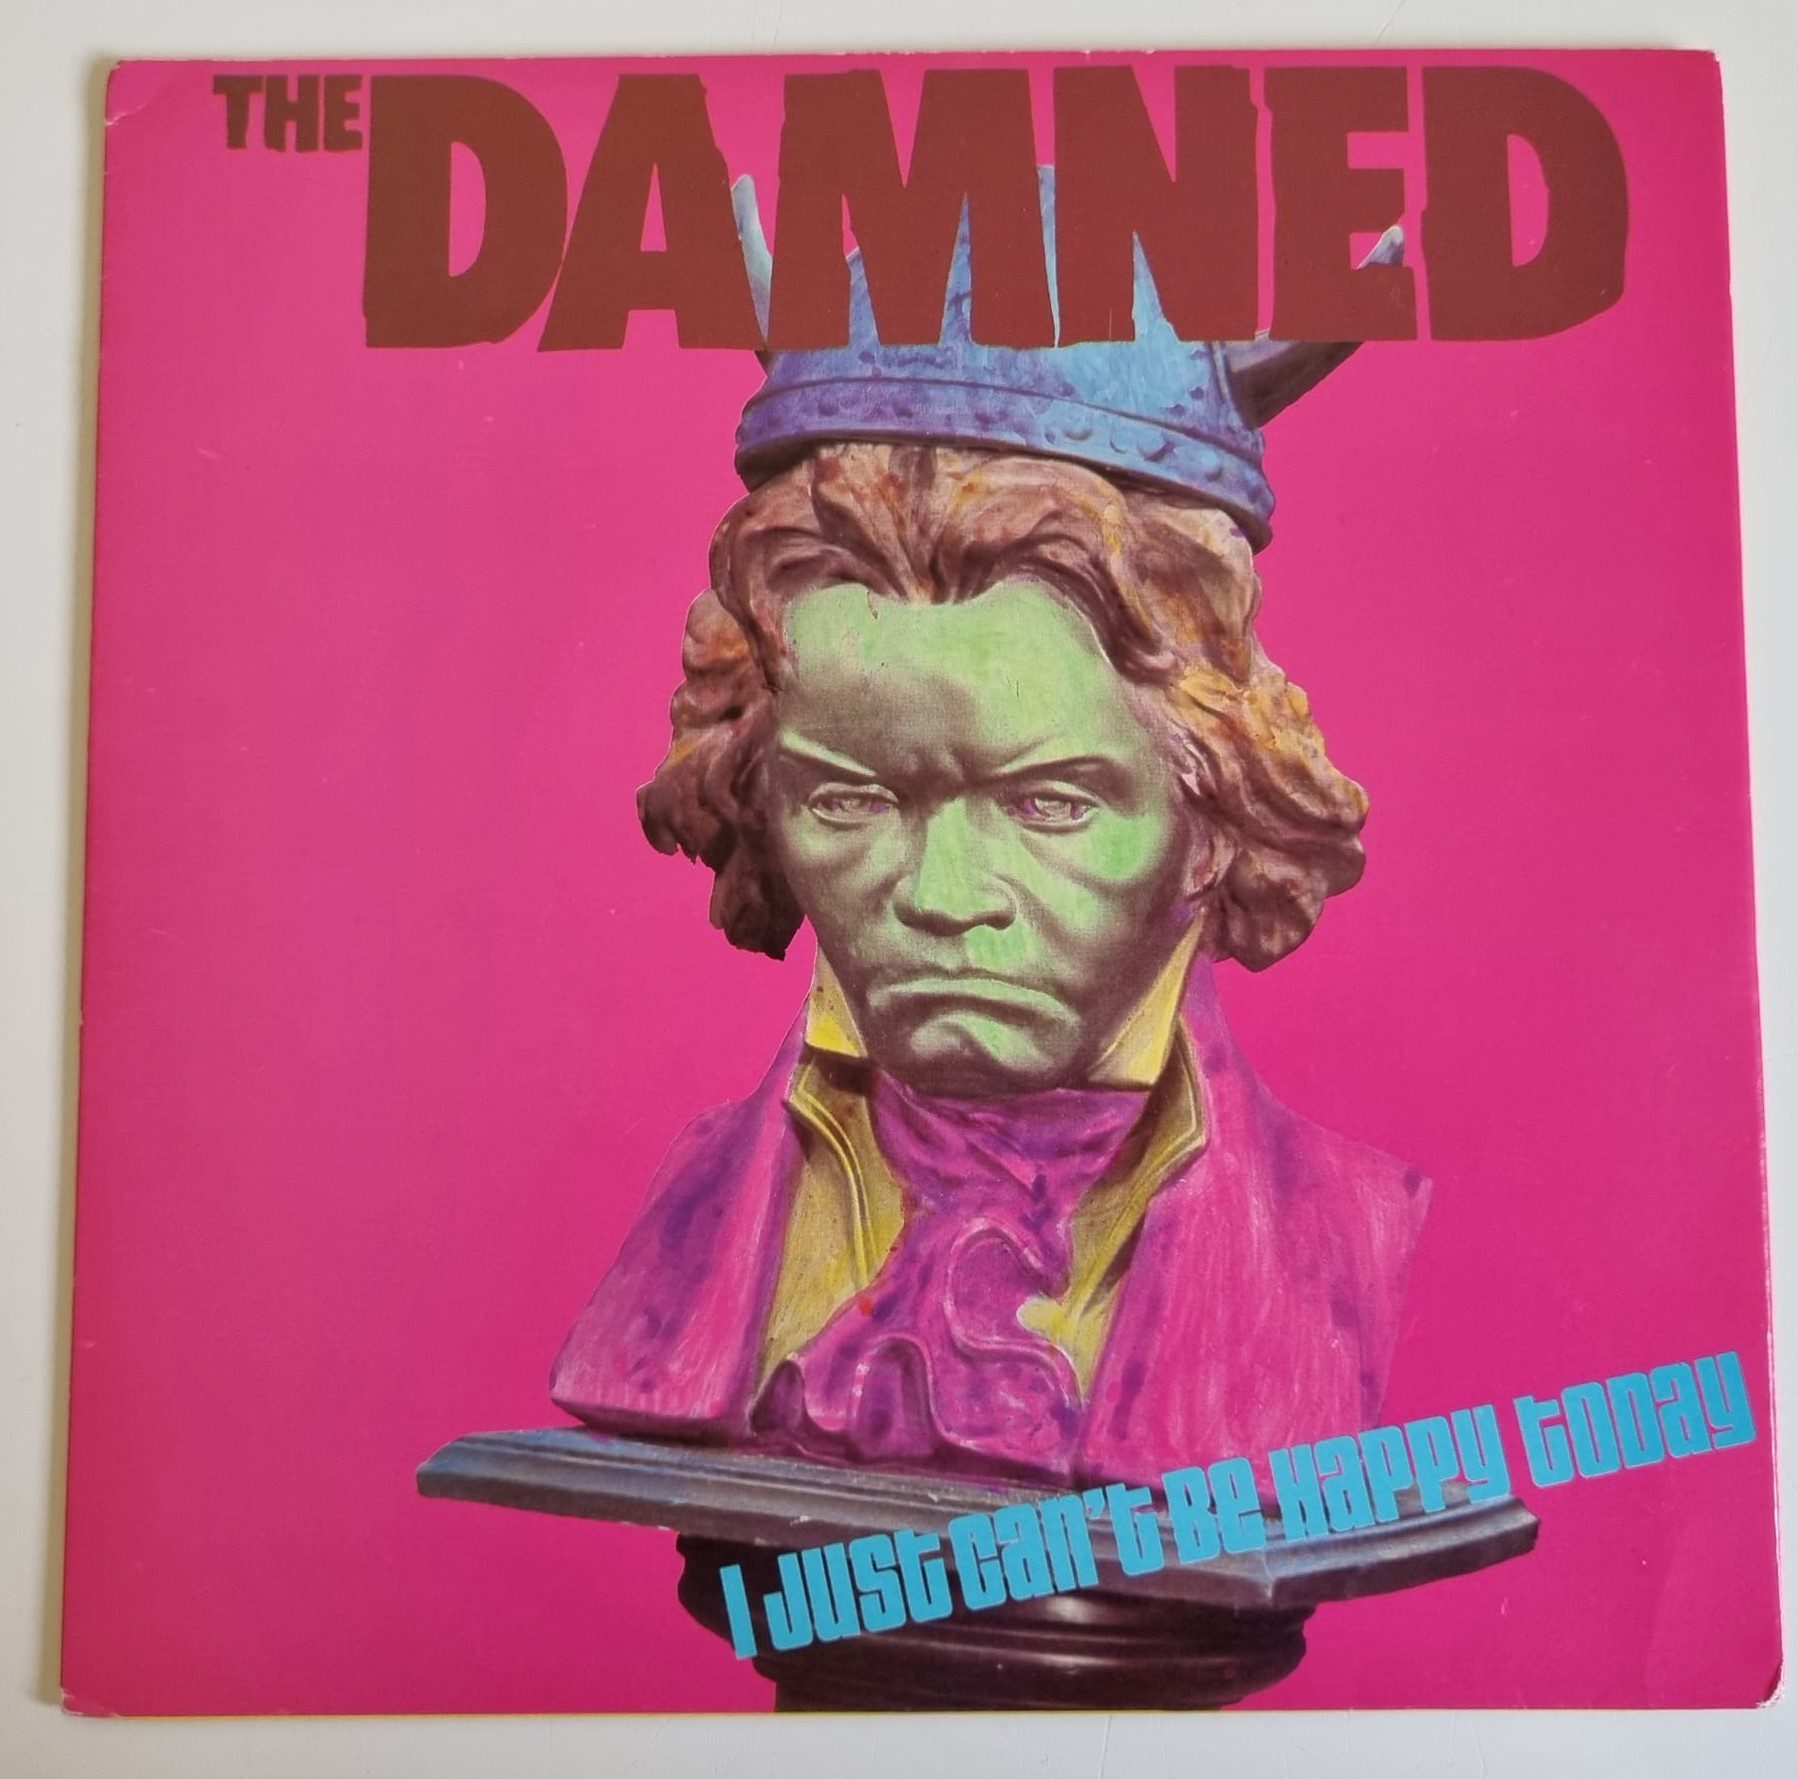 Buy this rare Damned record by clicking here